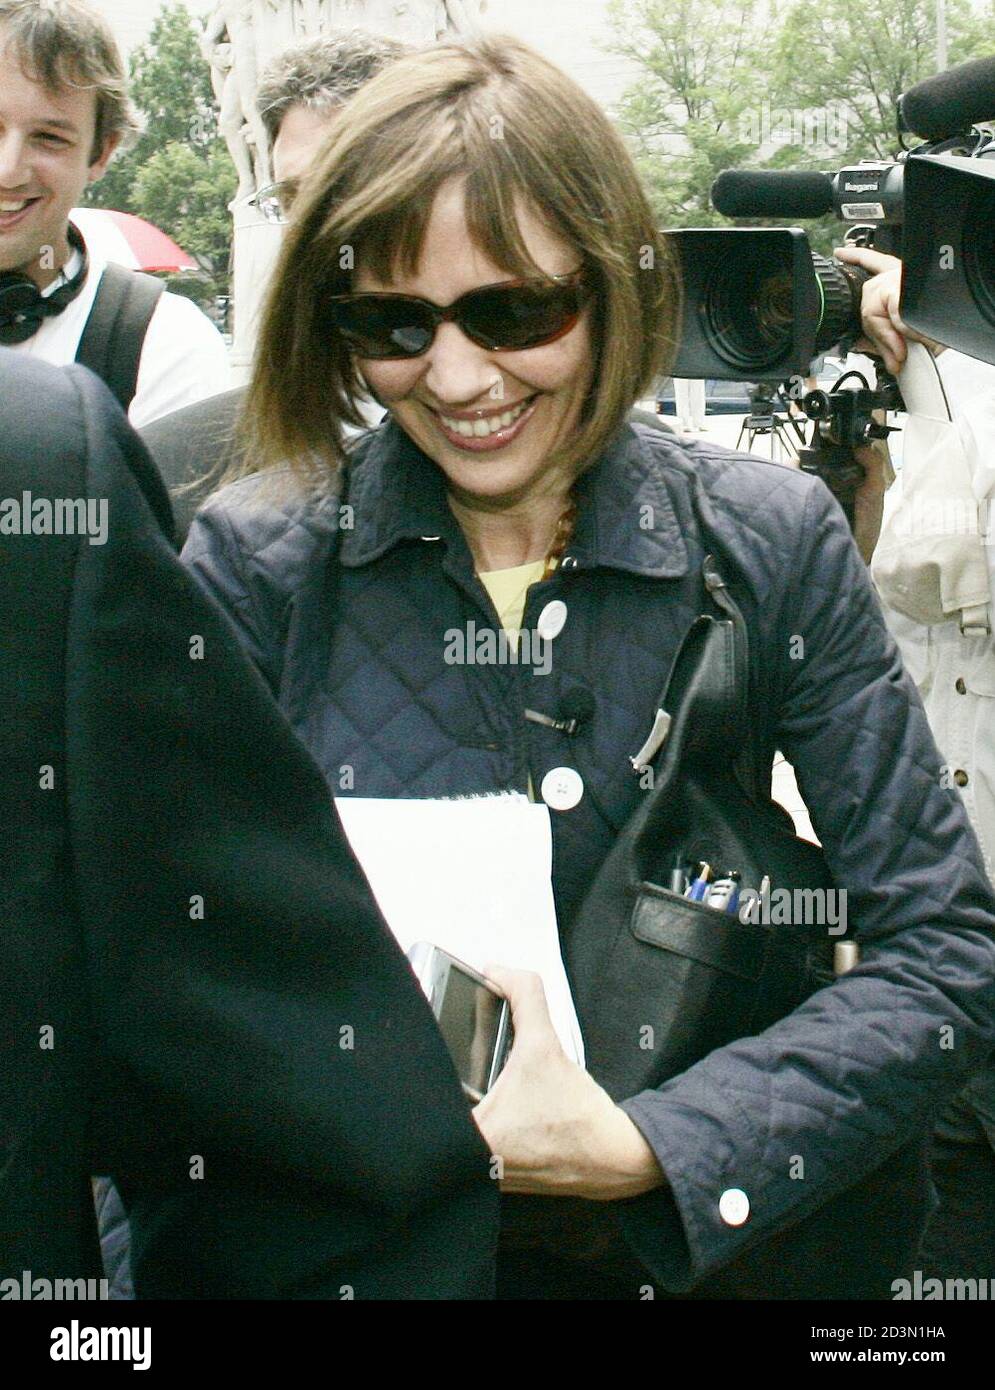 New York Times reporter Judith Miller walks towards the U.S. federal district court in Washington, July 6, 2005. Miller was attending a scheduled hearing on her refusal to provide the identity of her confidential sources to a prosecutor investigating the Bush administration's leak of a CIA officer's identity. Miller and Time magazine reporter Matthew Cooper face possible jail time if they continue to refuse to comply with an order to divulge their source for the story. REUTERS/Larry Downing  LSD/DY Stock Photo